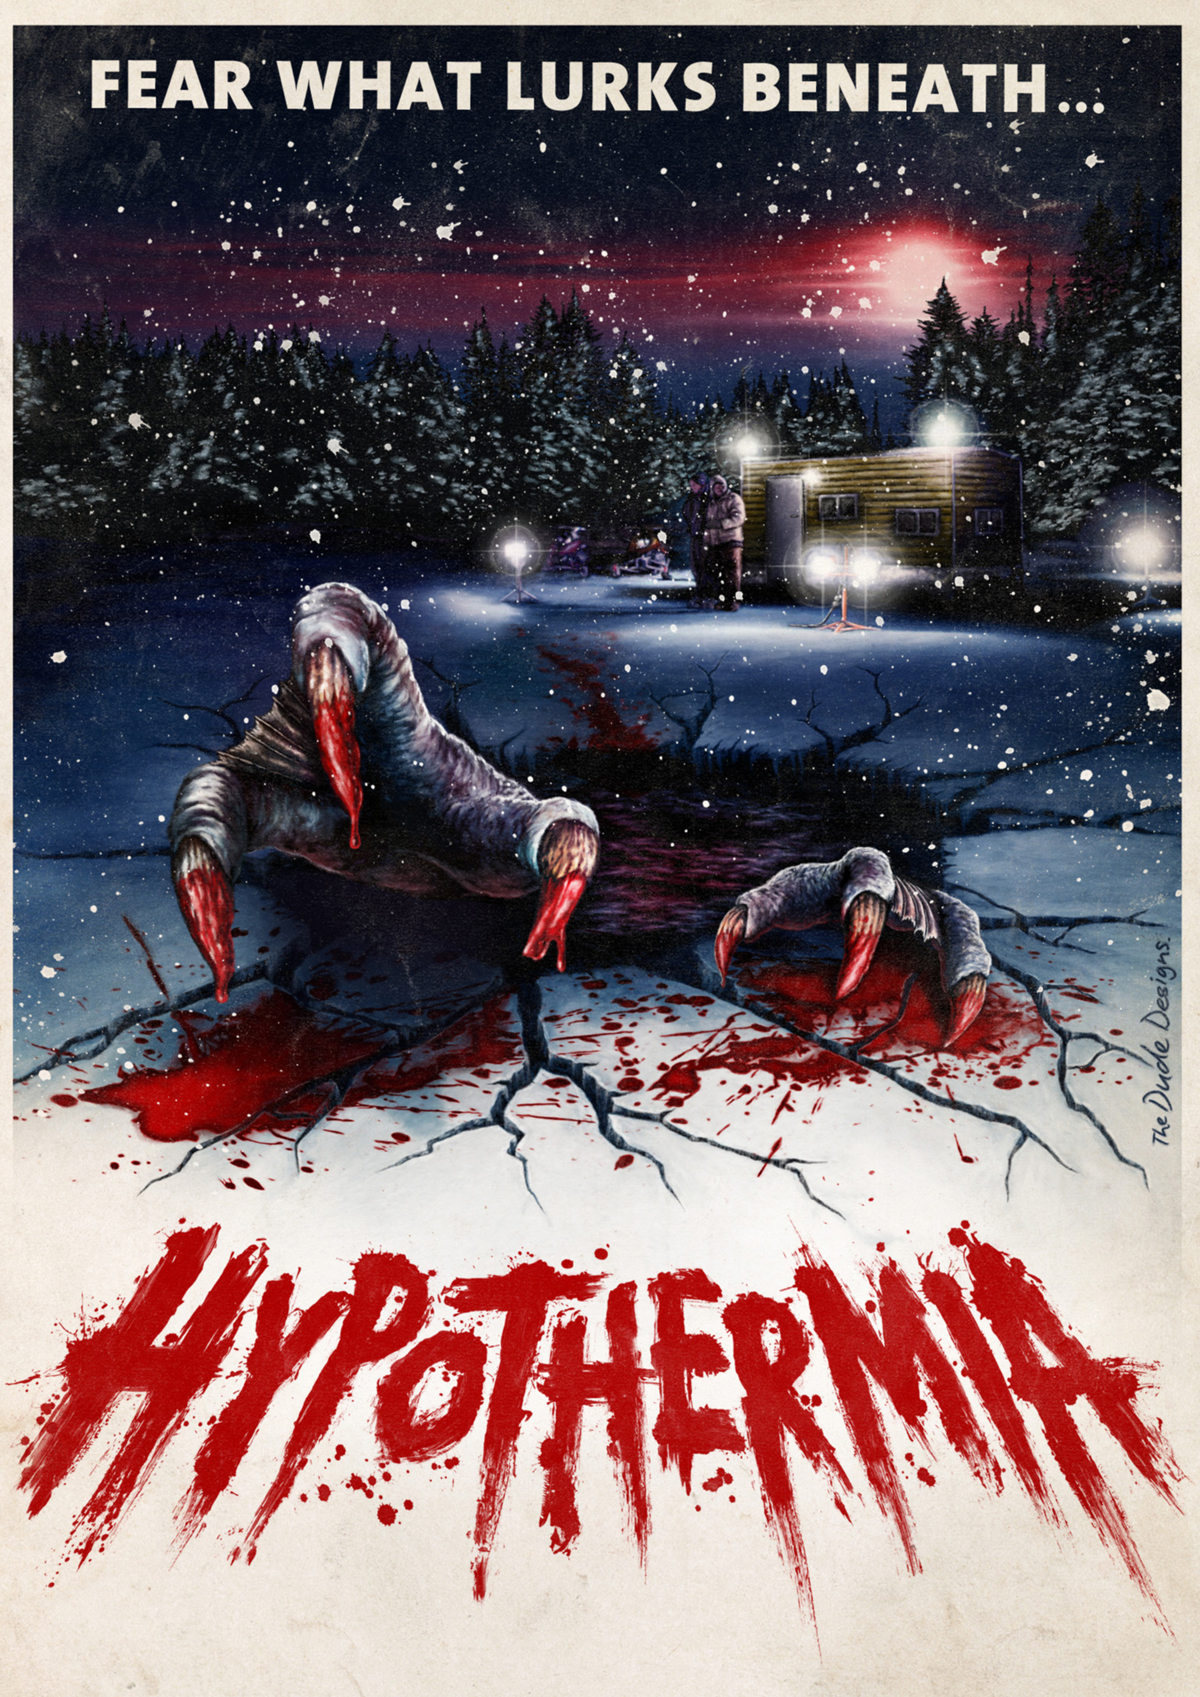 HYPOTHERMIA Available on DVD October 2nd